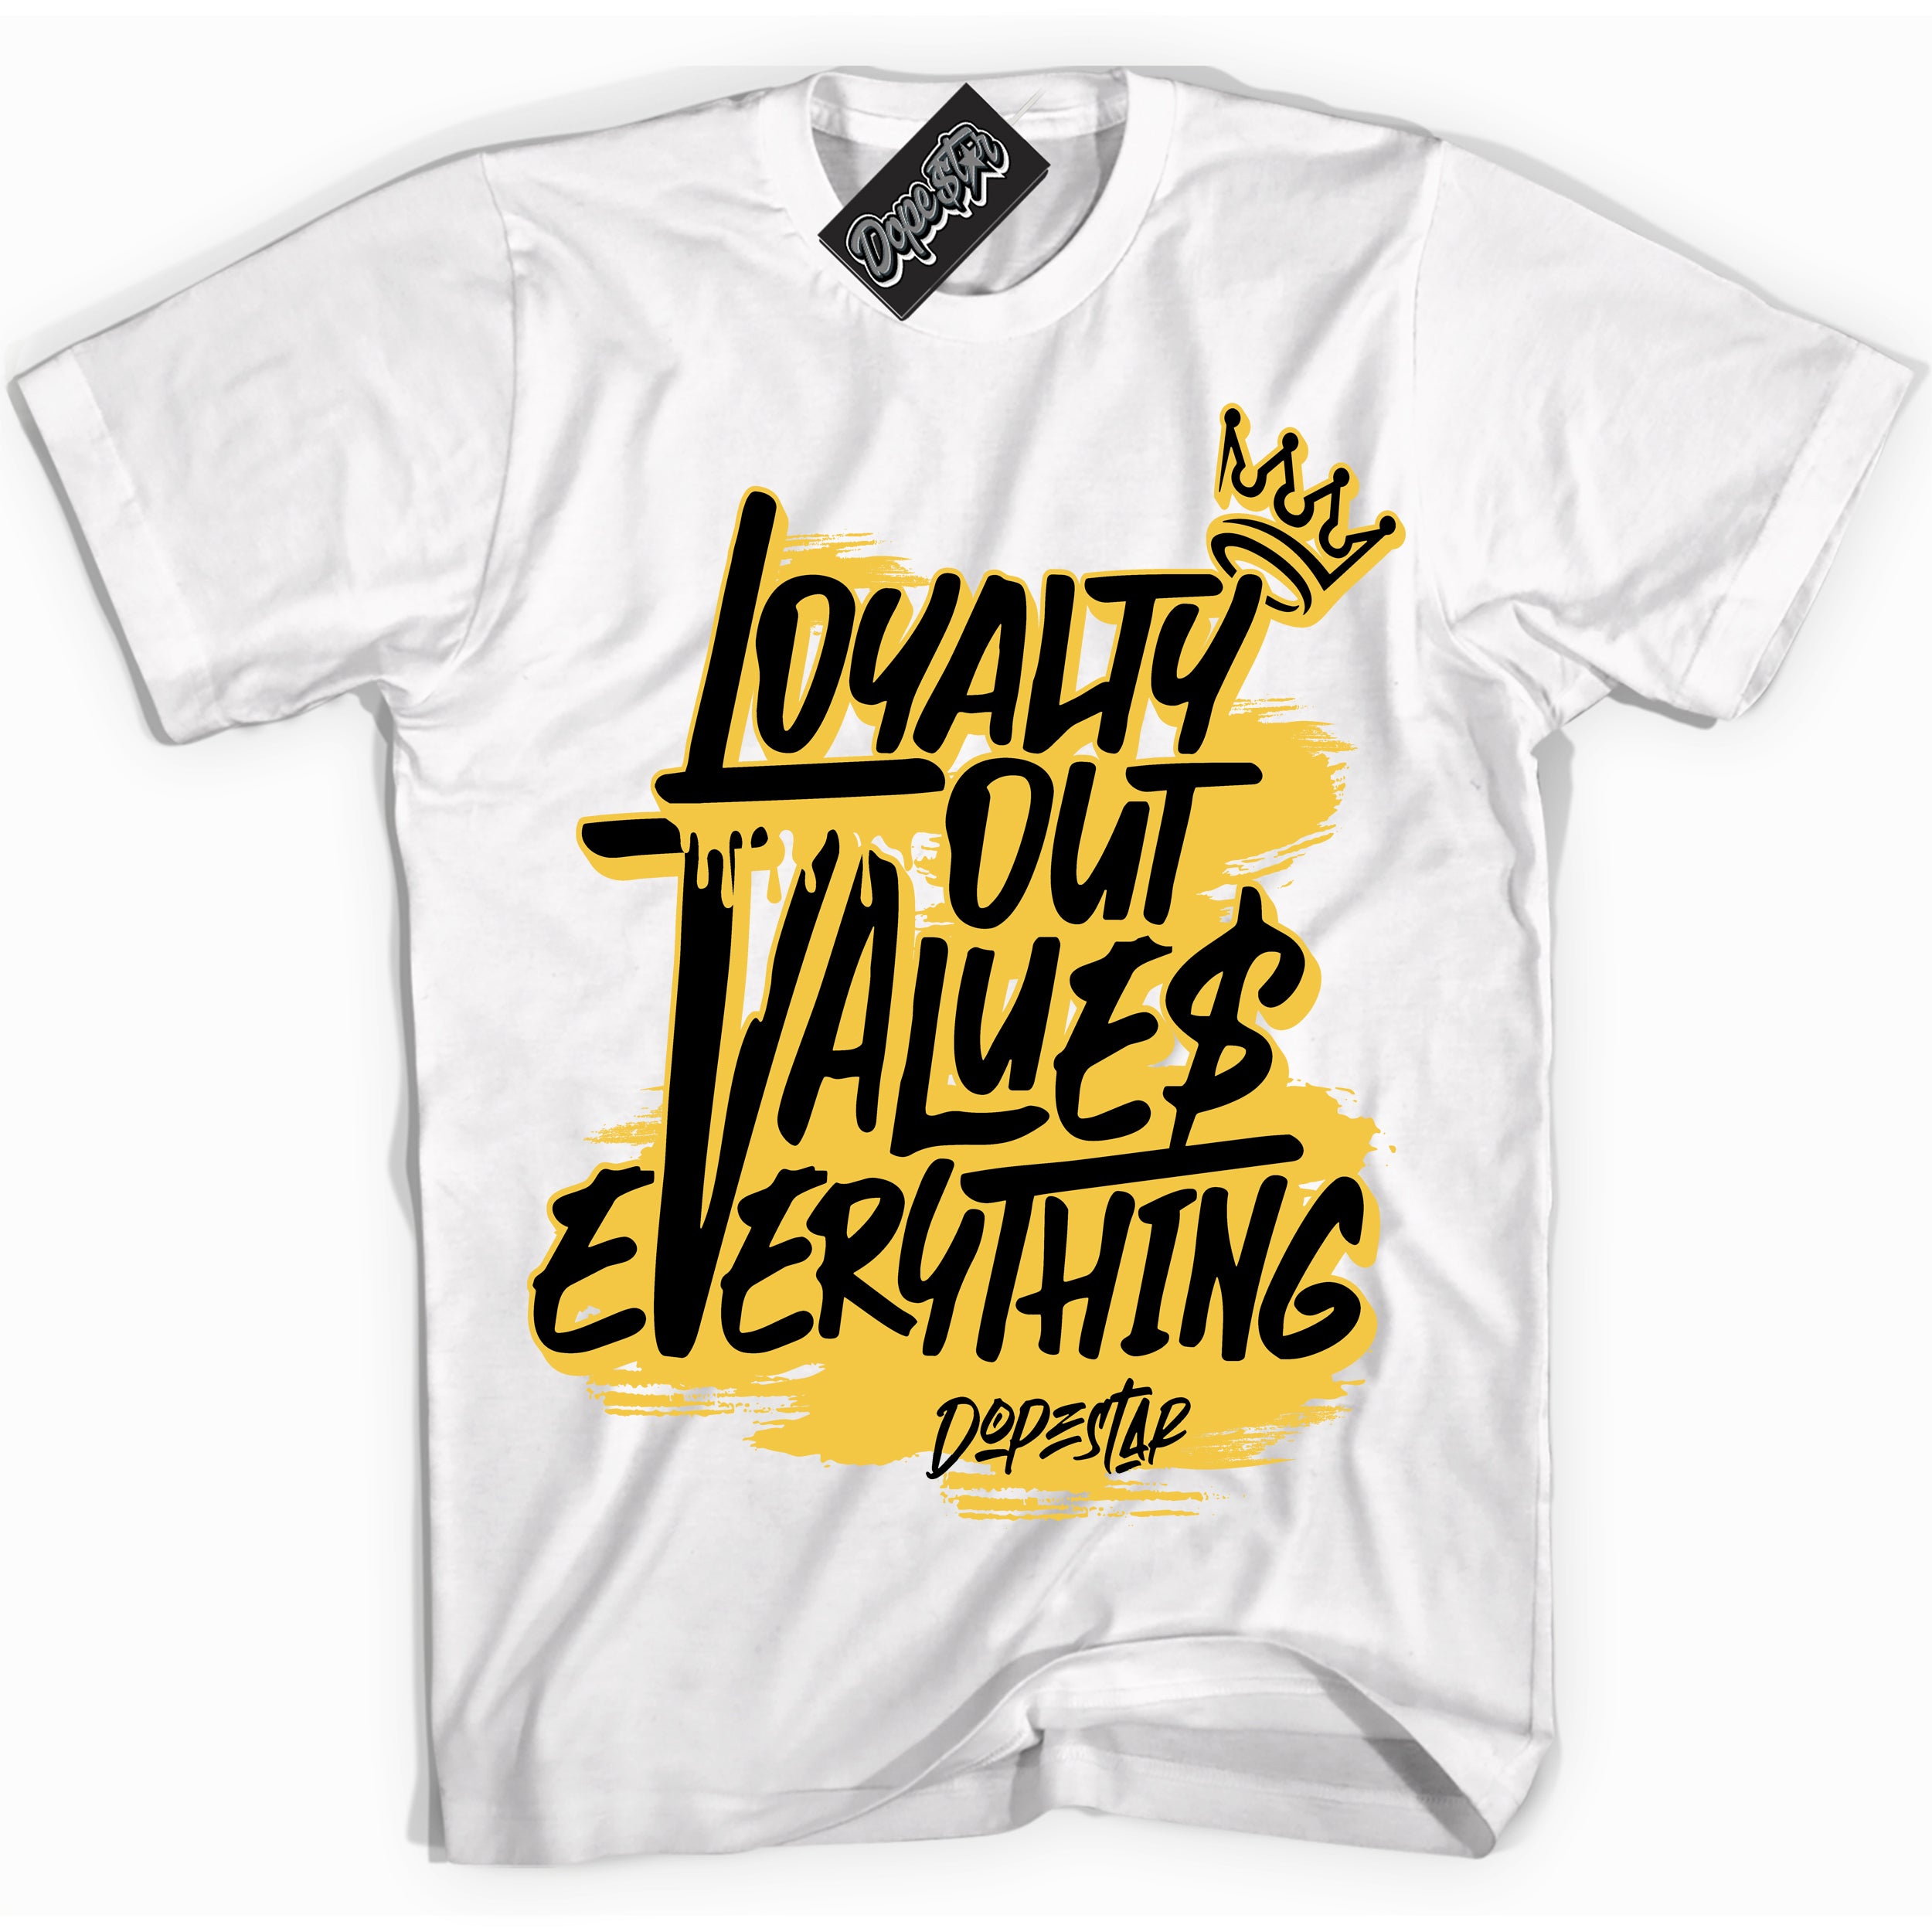 Cool White Shirt with “ Loyalty Out Values Everything” design that perfectly matches Black Taxi 12s Sneakers.